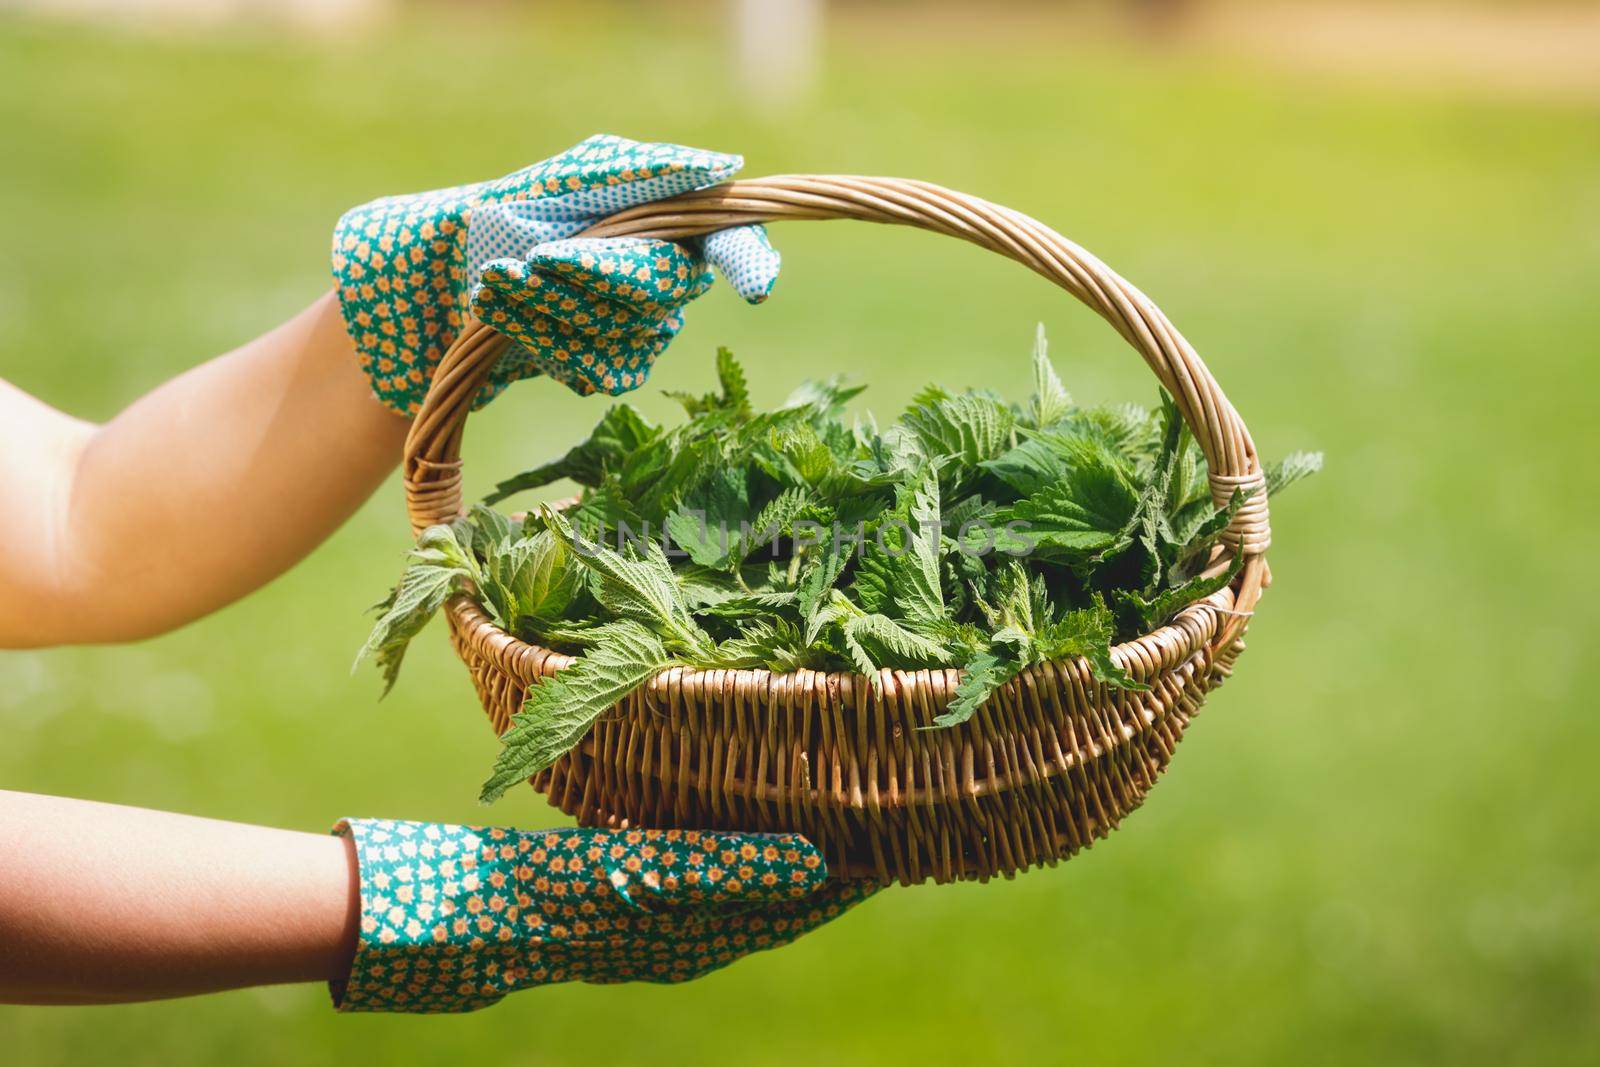 Freshly Picked Nettle. Woman holding a basket of fresh stinging nettles with garden gloves, selective focus by Slast20